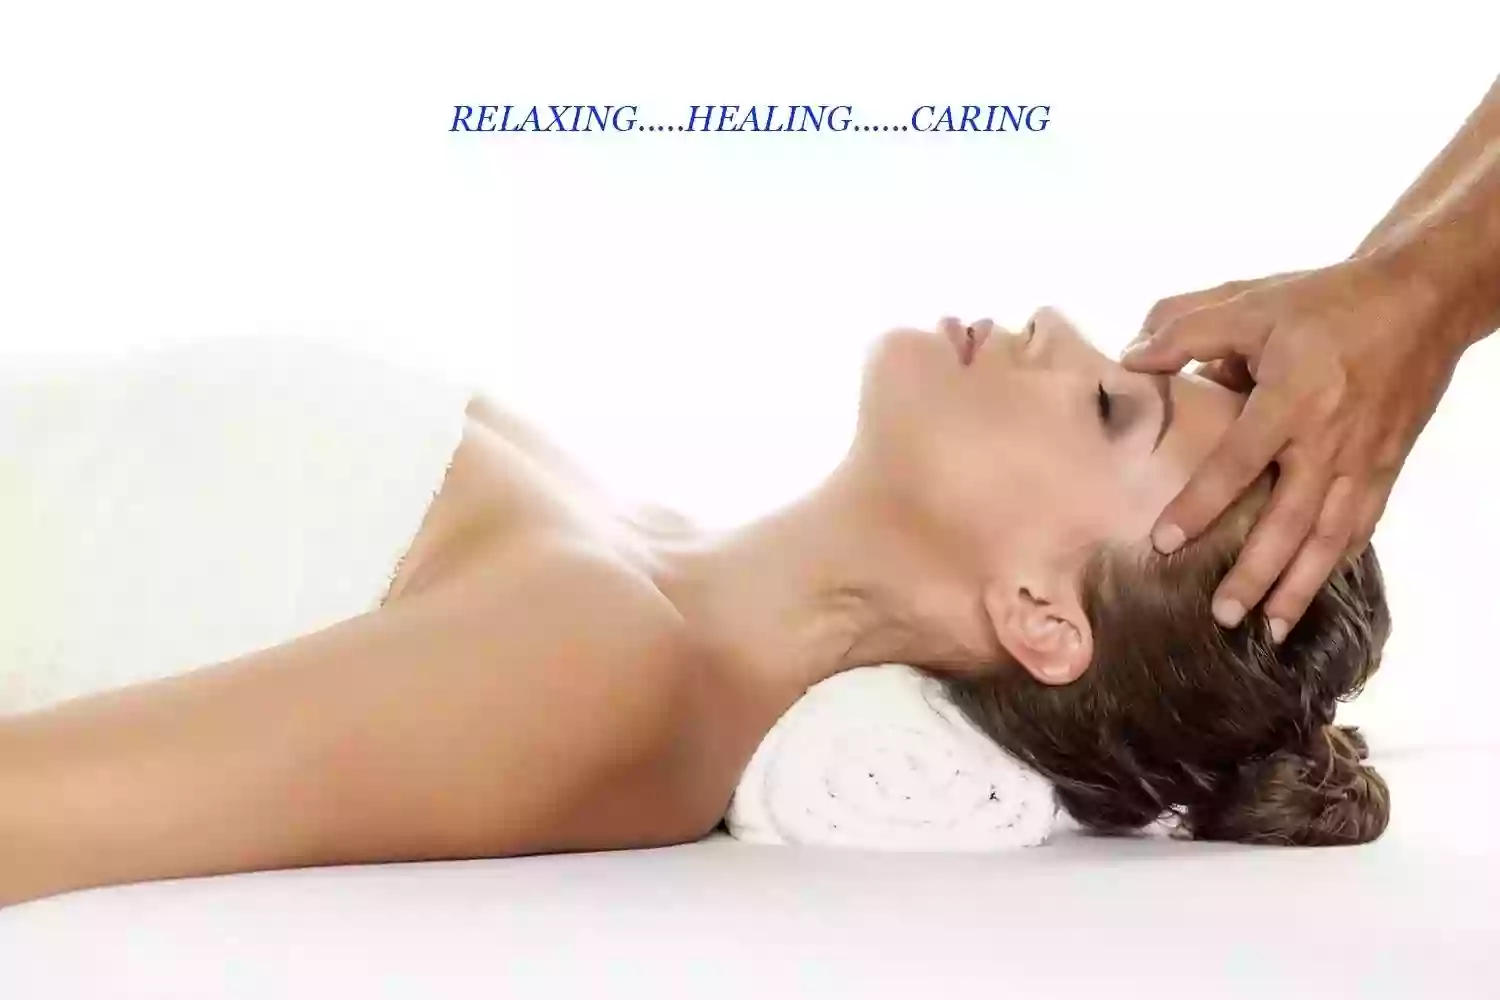 A Caring Touch Therapeutic Massage